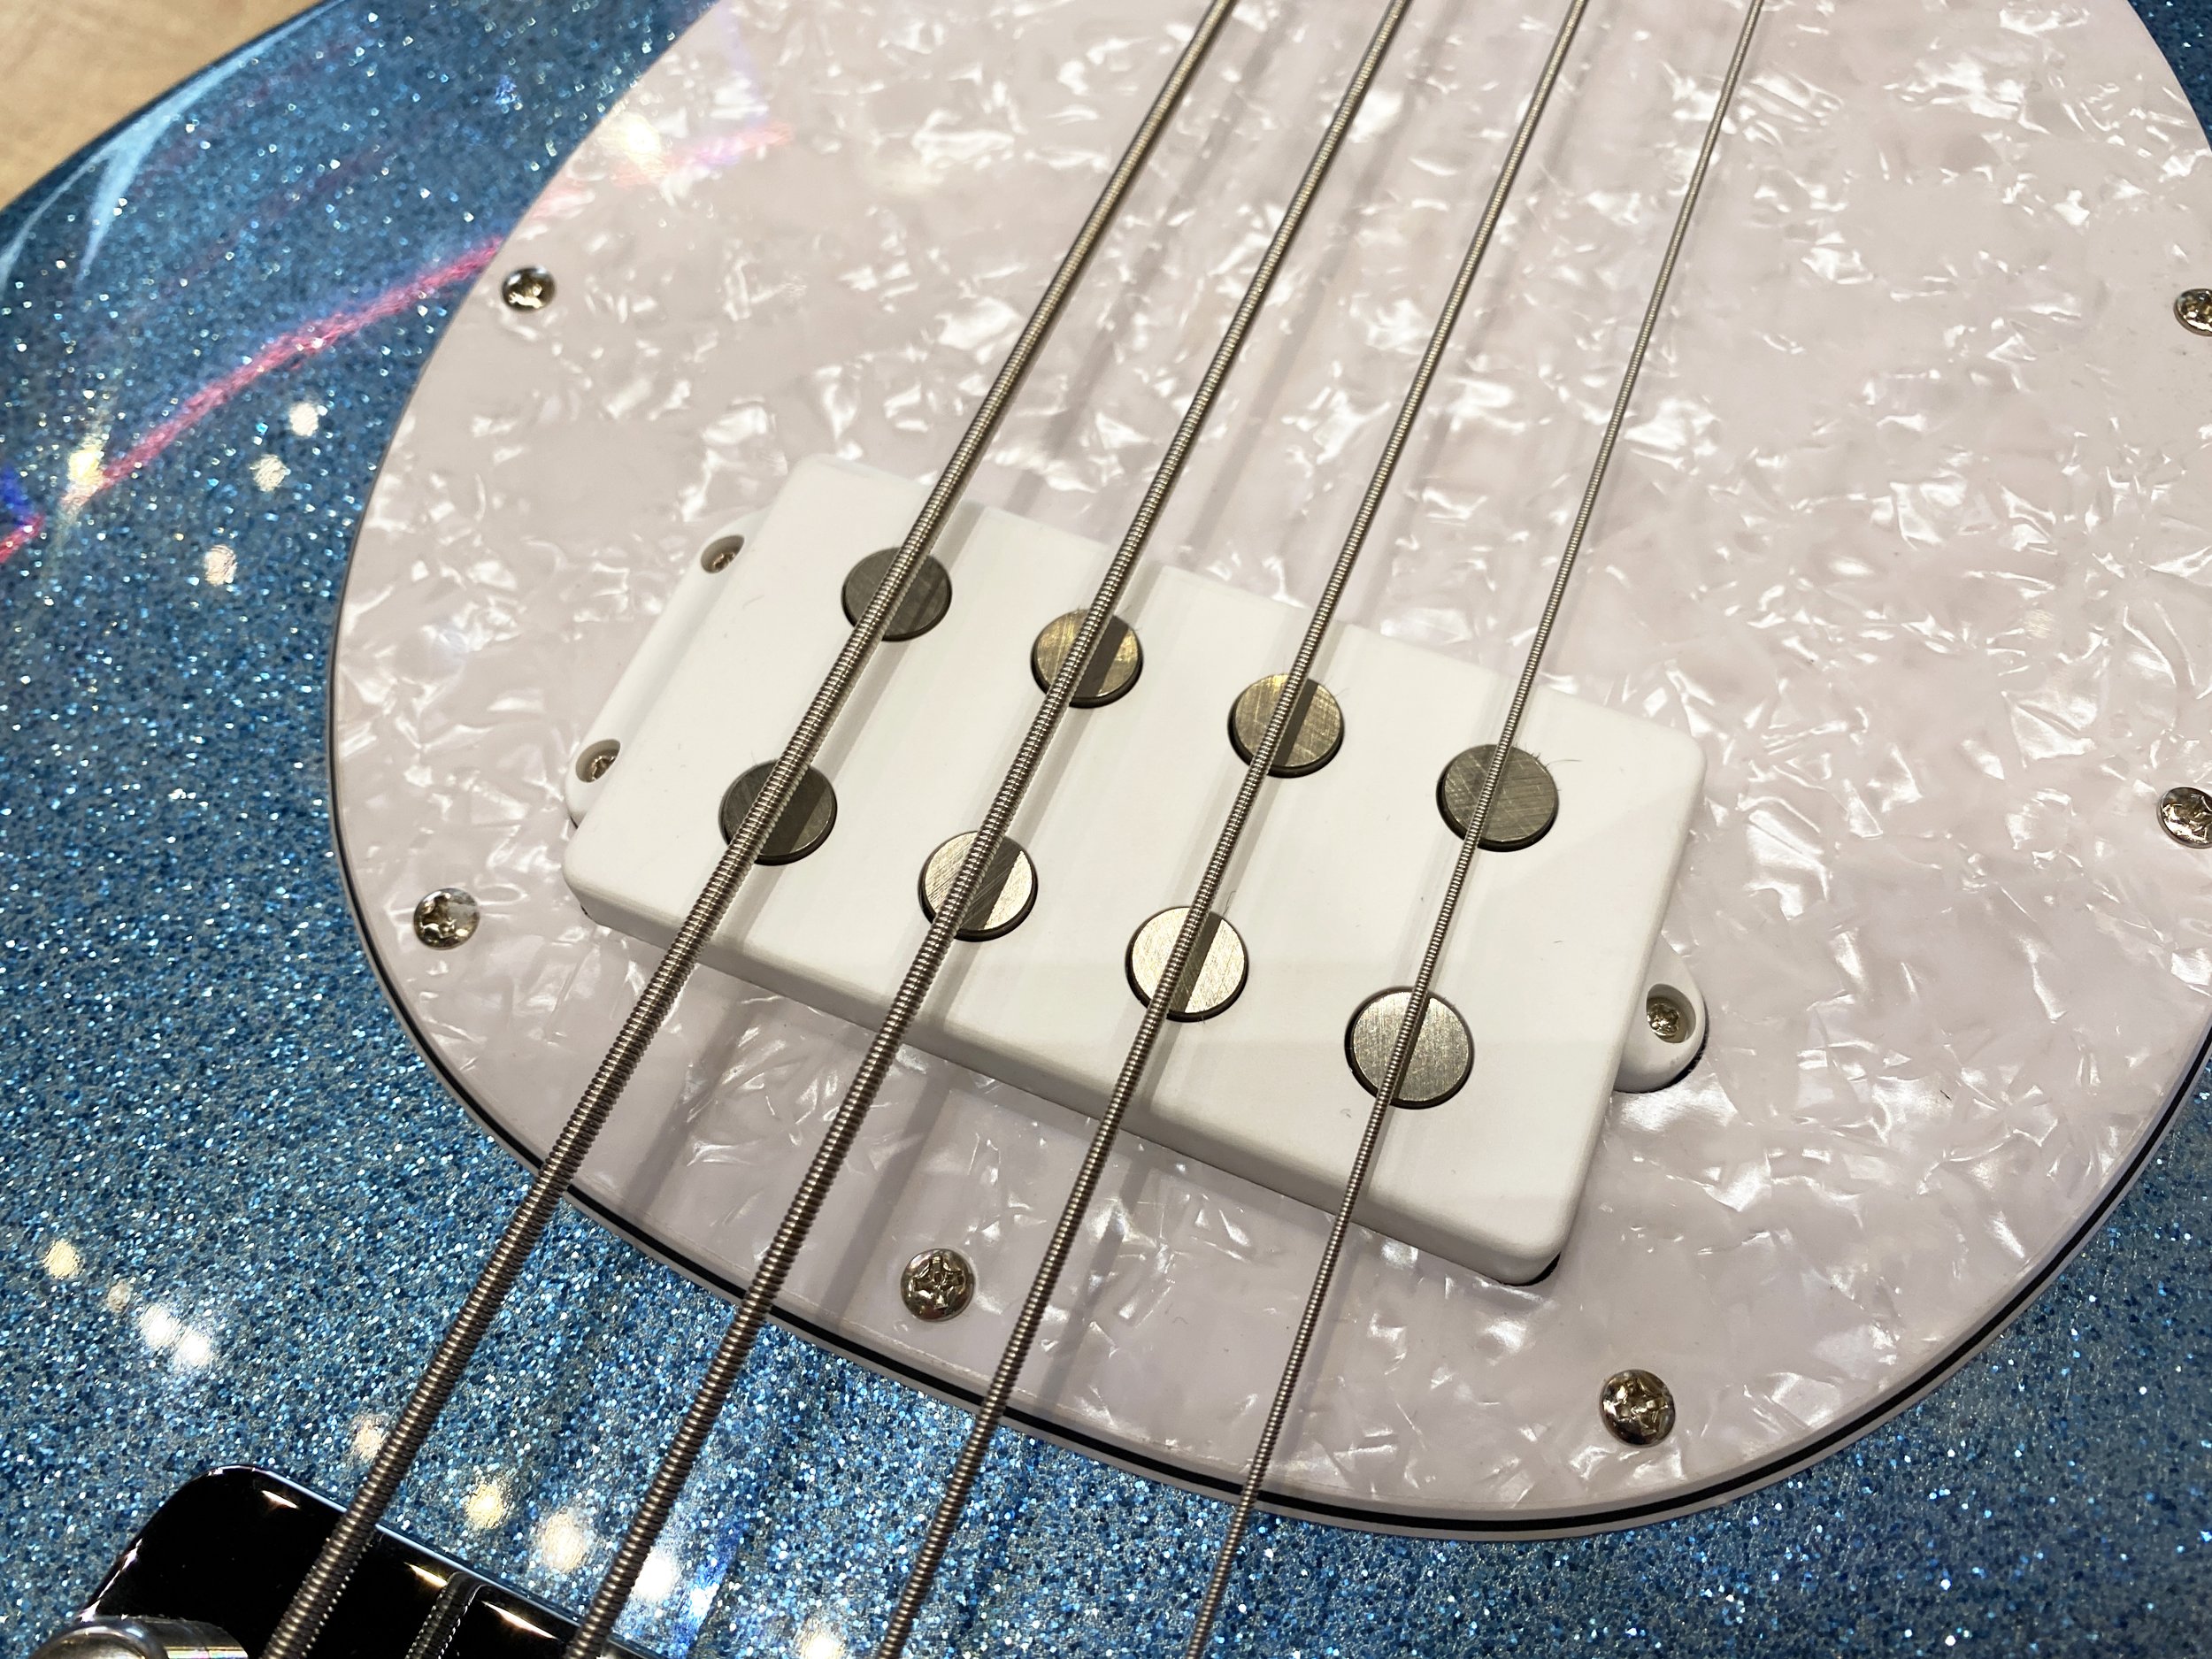 Sterling By Music Man StingRay Ray34 Bass Blue Sparkle — Andy Babiuk's Fab  Gear